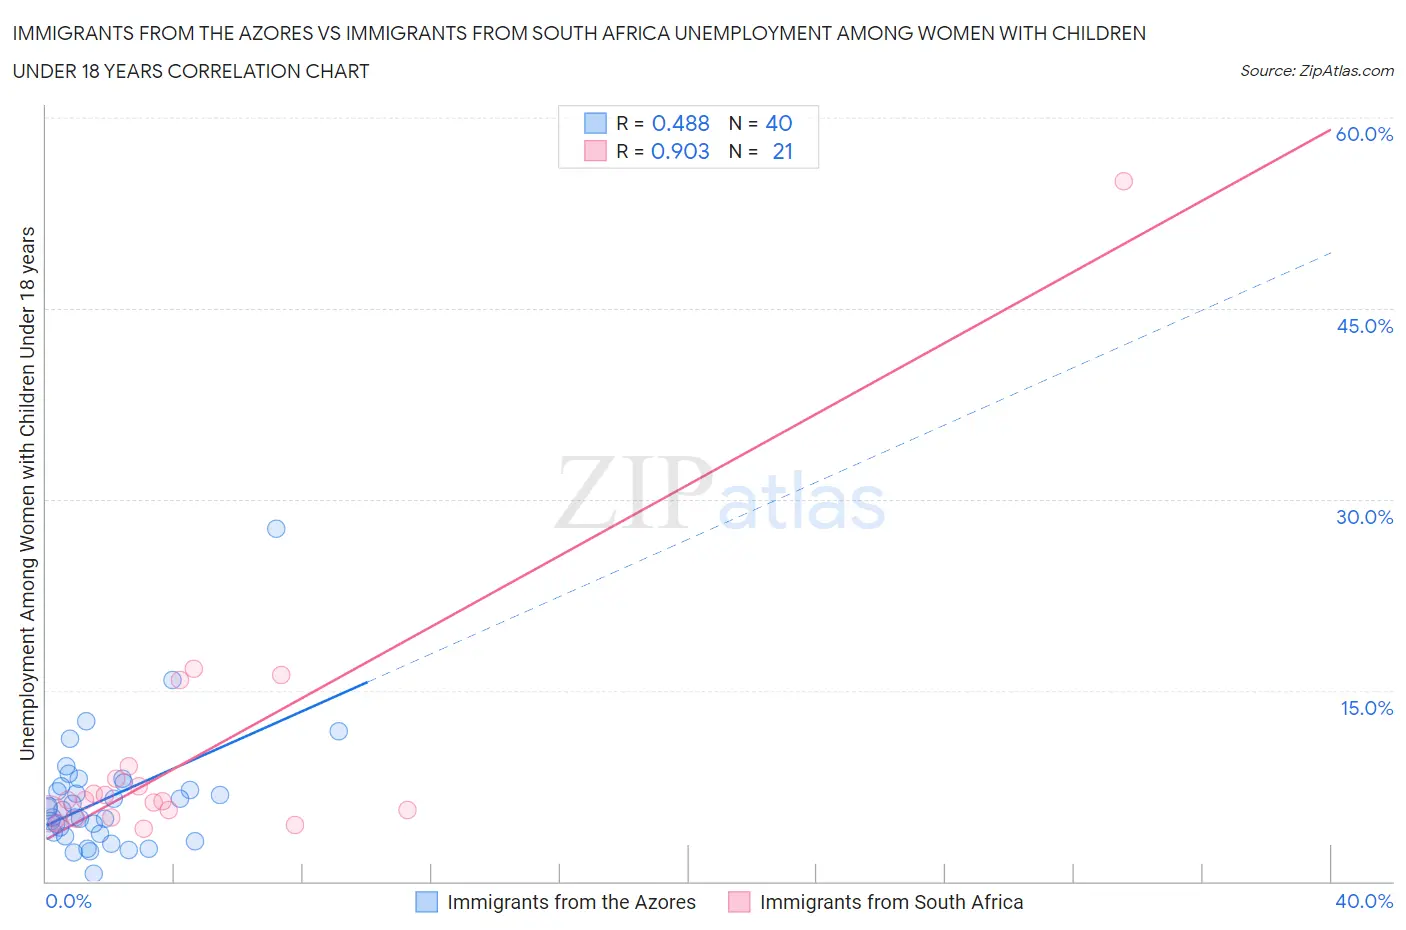 Immigrants from the Azores vs Immigrants from South Africa Unemployment Among Women with Children Under 18 years